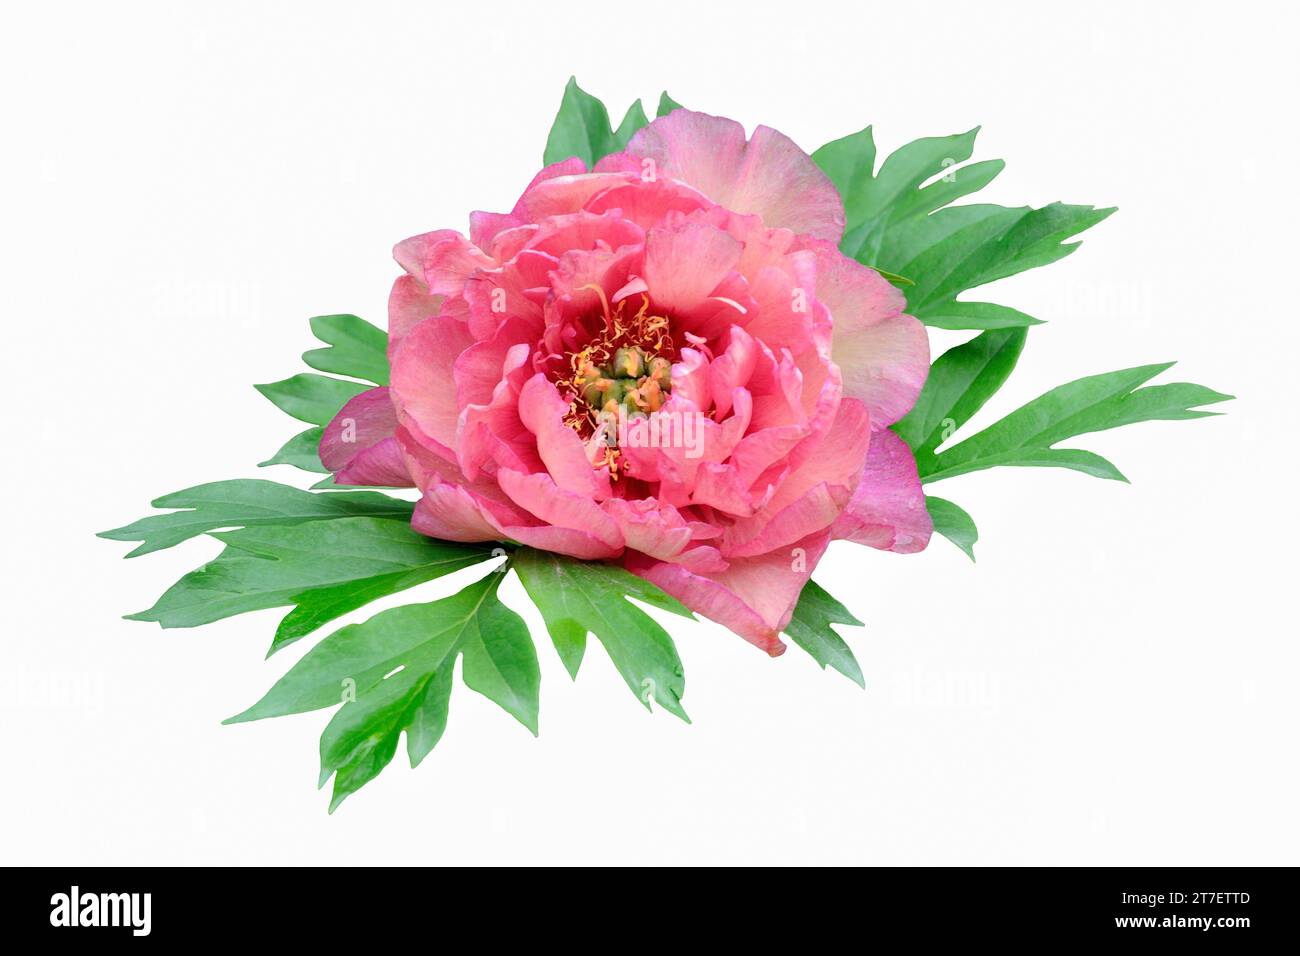 Single salmon pink peony flower with green leaves close up, isolated on white background. Delicate, elegant detail of floral or festive design Stock Photo